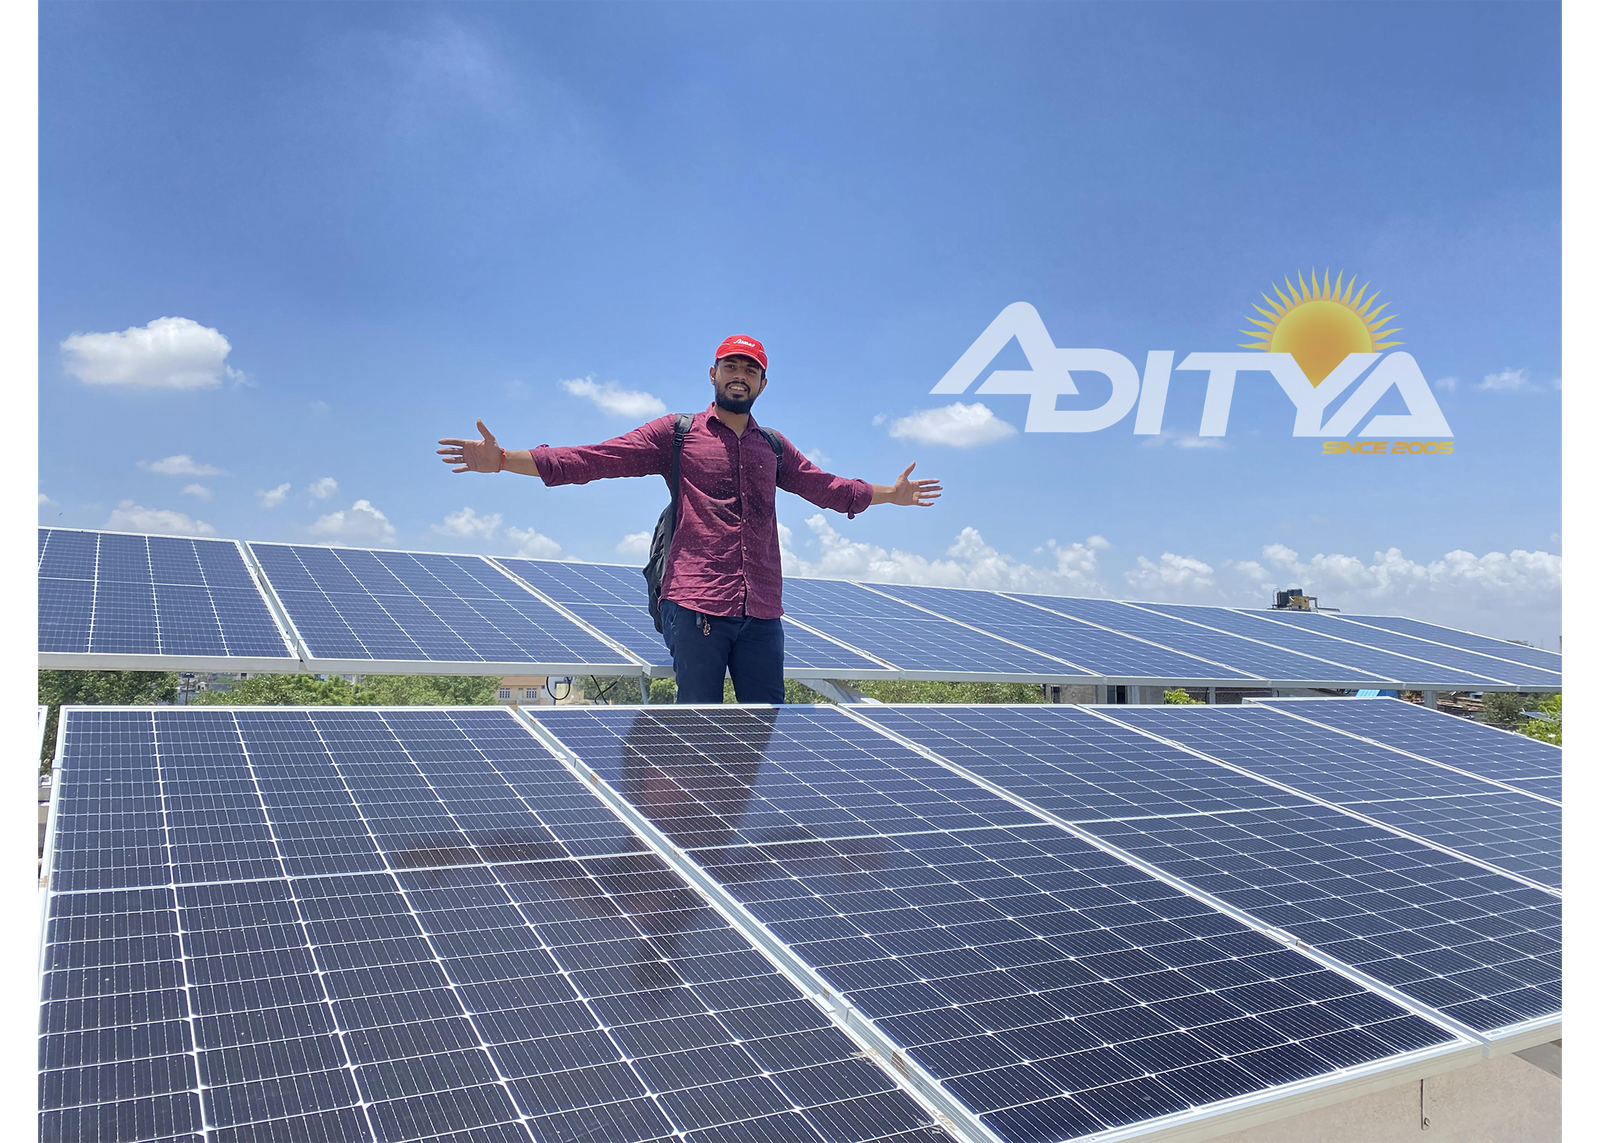 Man Standing near Solar panels showing his passion for Solar